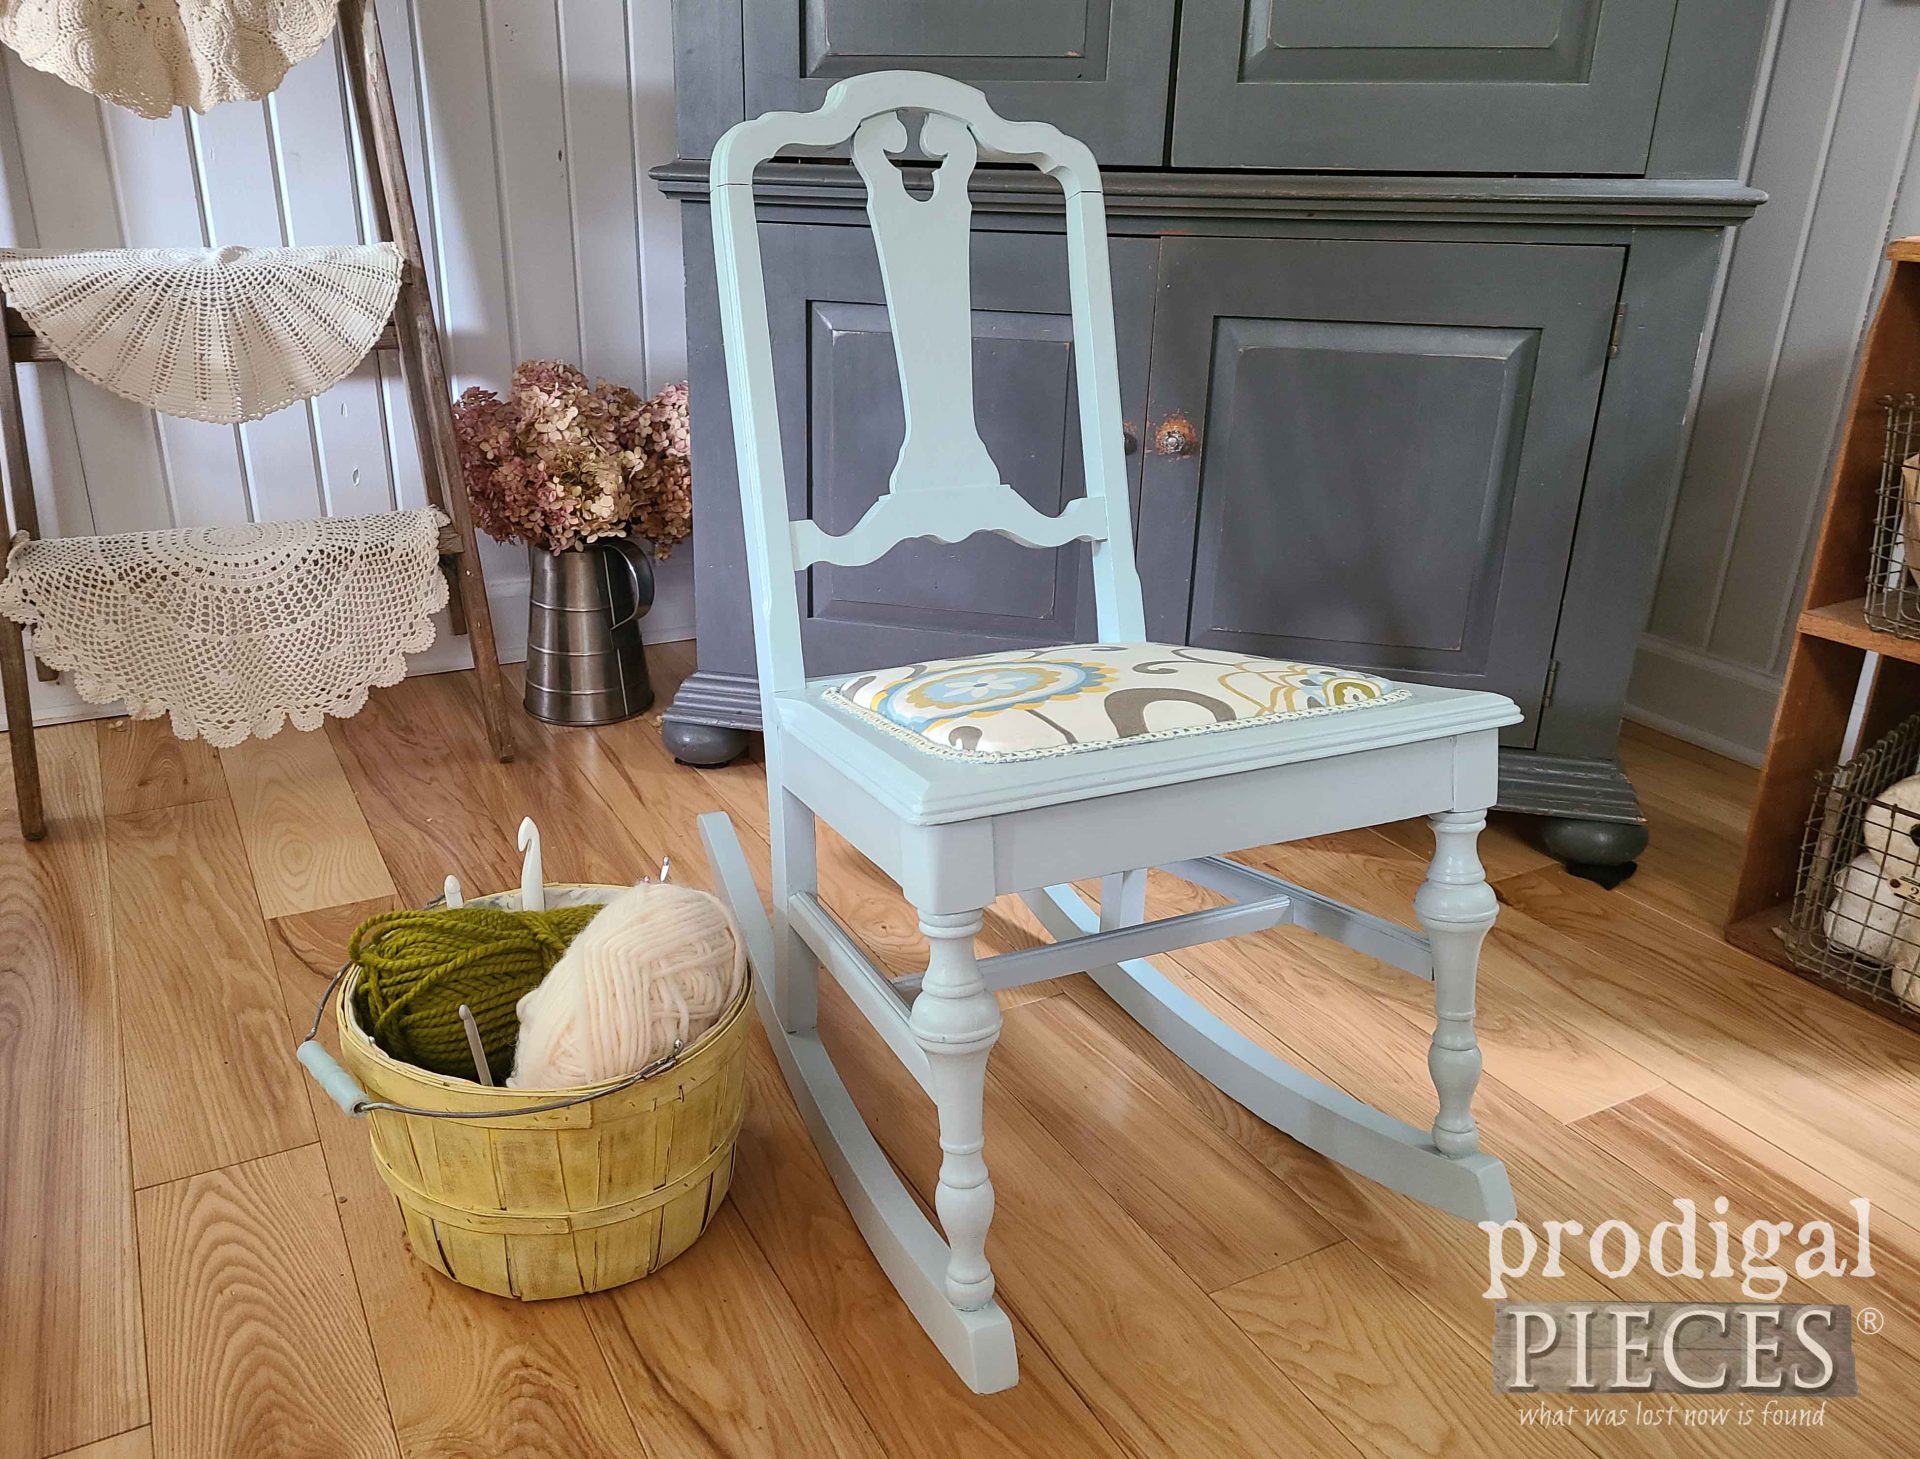 DIY Broken Rocking Chair Repair and Upholstery by Larissa of Prodigal Pieces | prodigalpieces.com #prodigalpieces #diy #antique #sewing